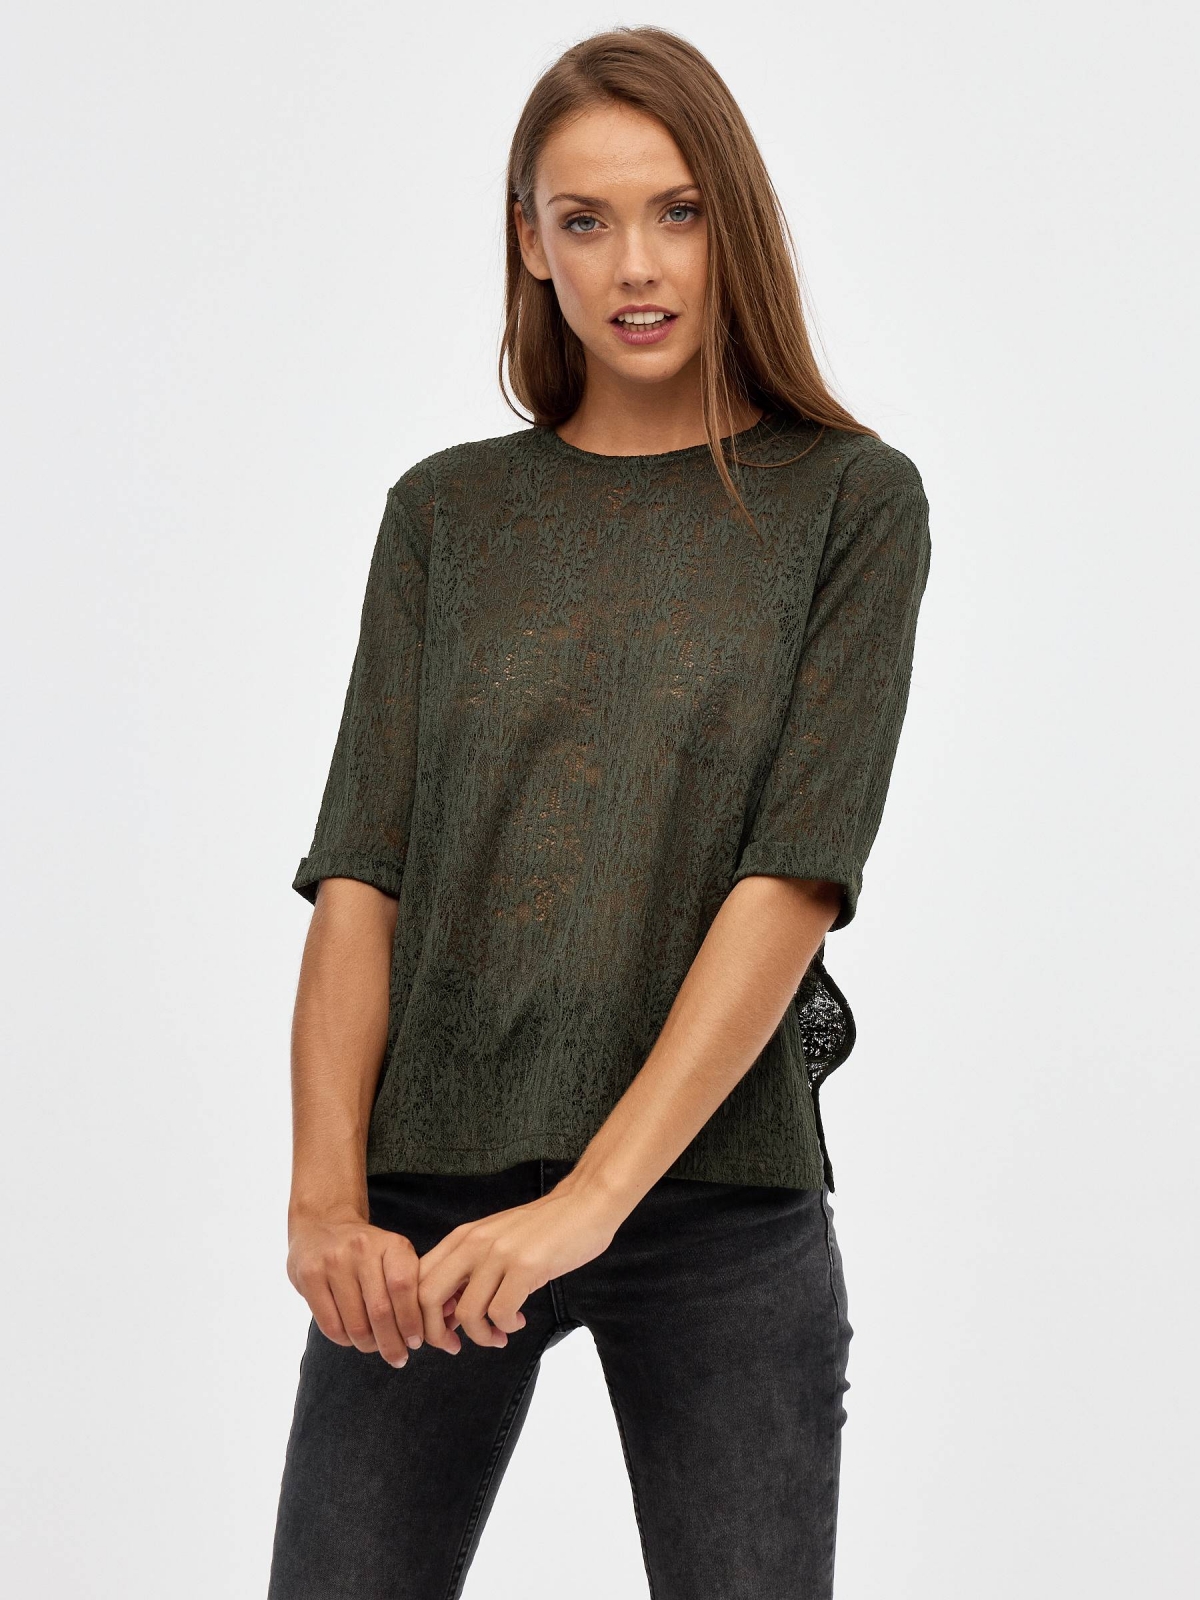 Printed lace t-shirt dark green middle front view